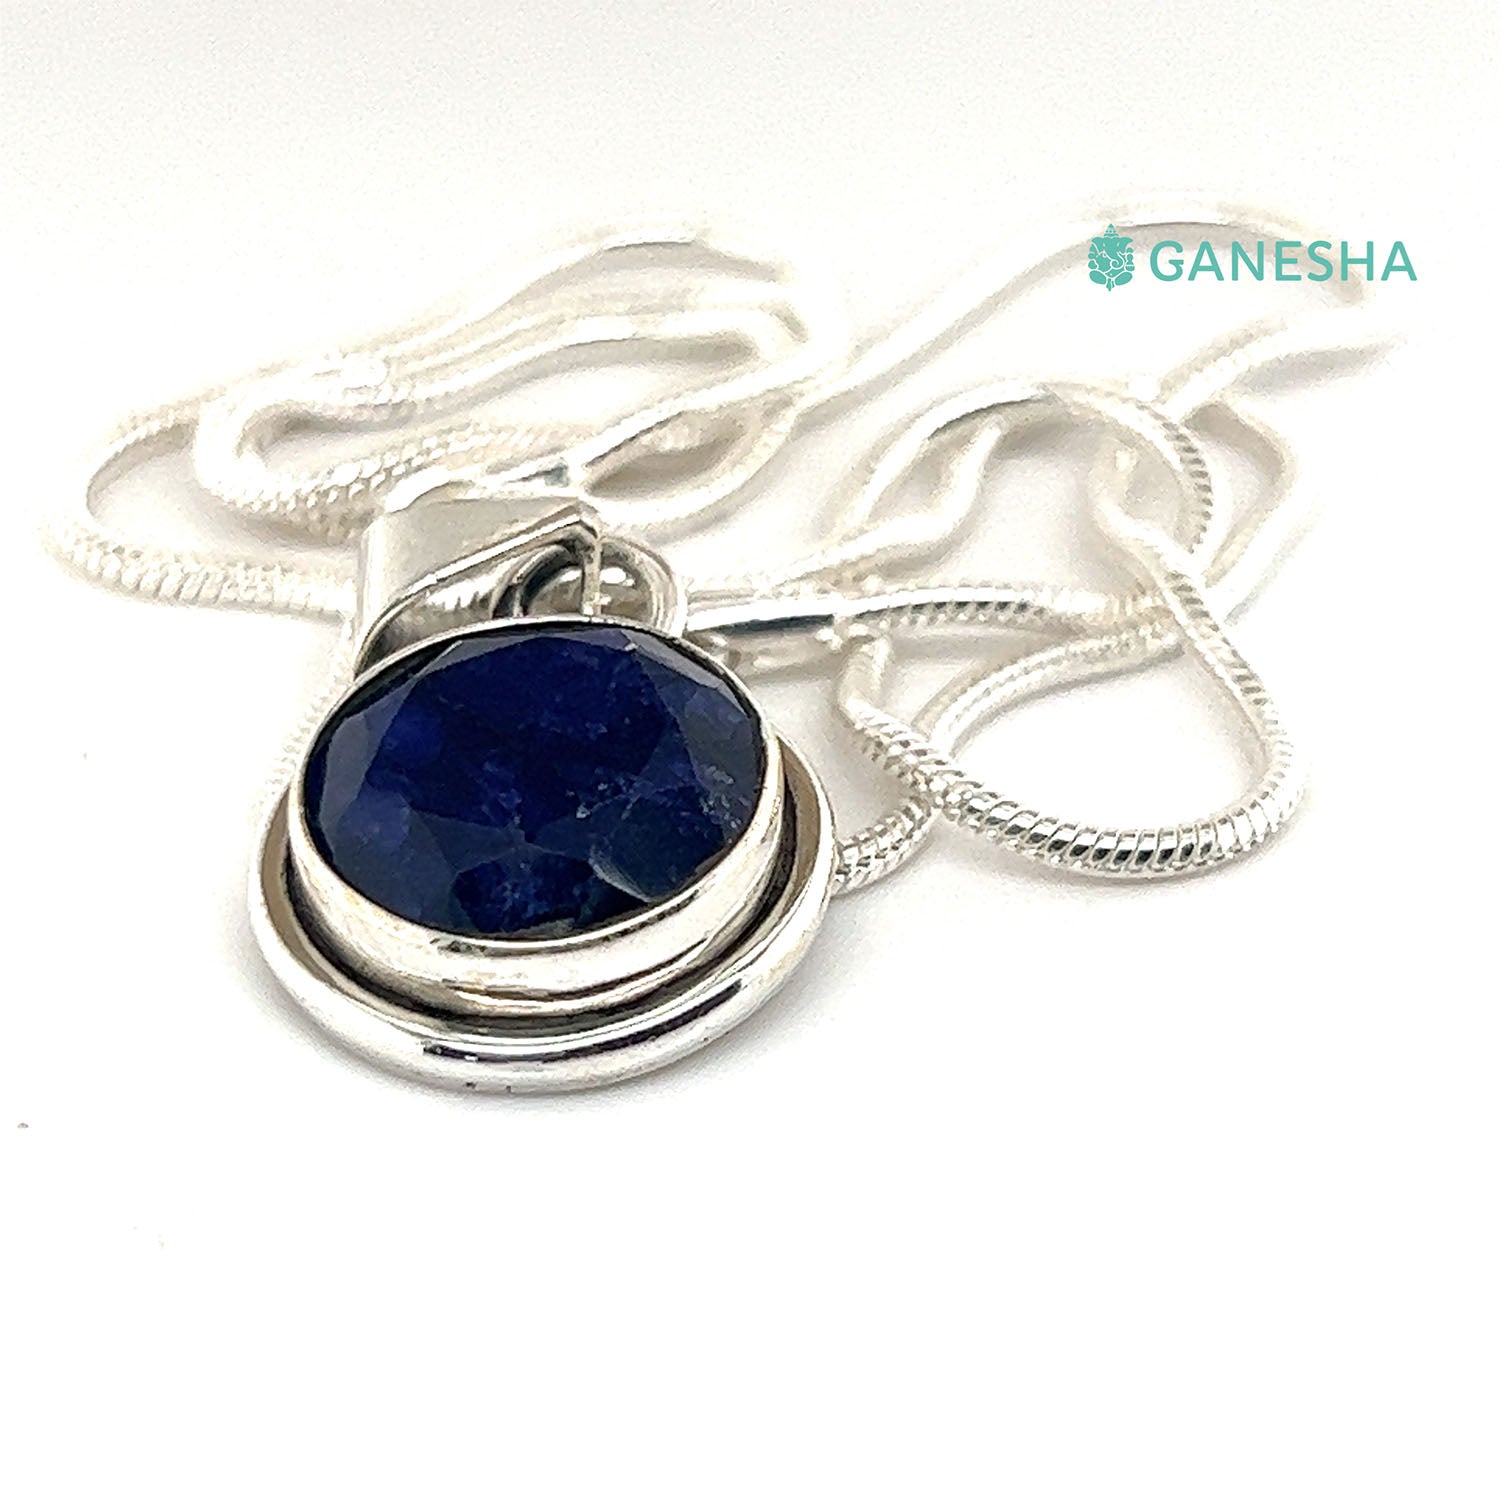 Ganesha Handicrafts, Blue Sapphire-925 Sterling Silver Jewellery Gift set with Chain, Women's Fashion Sterling Silver Jewellery . Round Design Blue Sapphire- 925 Sterling Silver Jewellery.